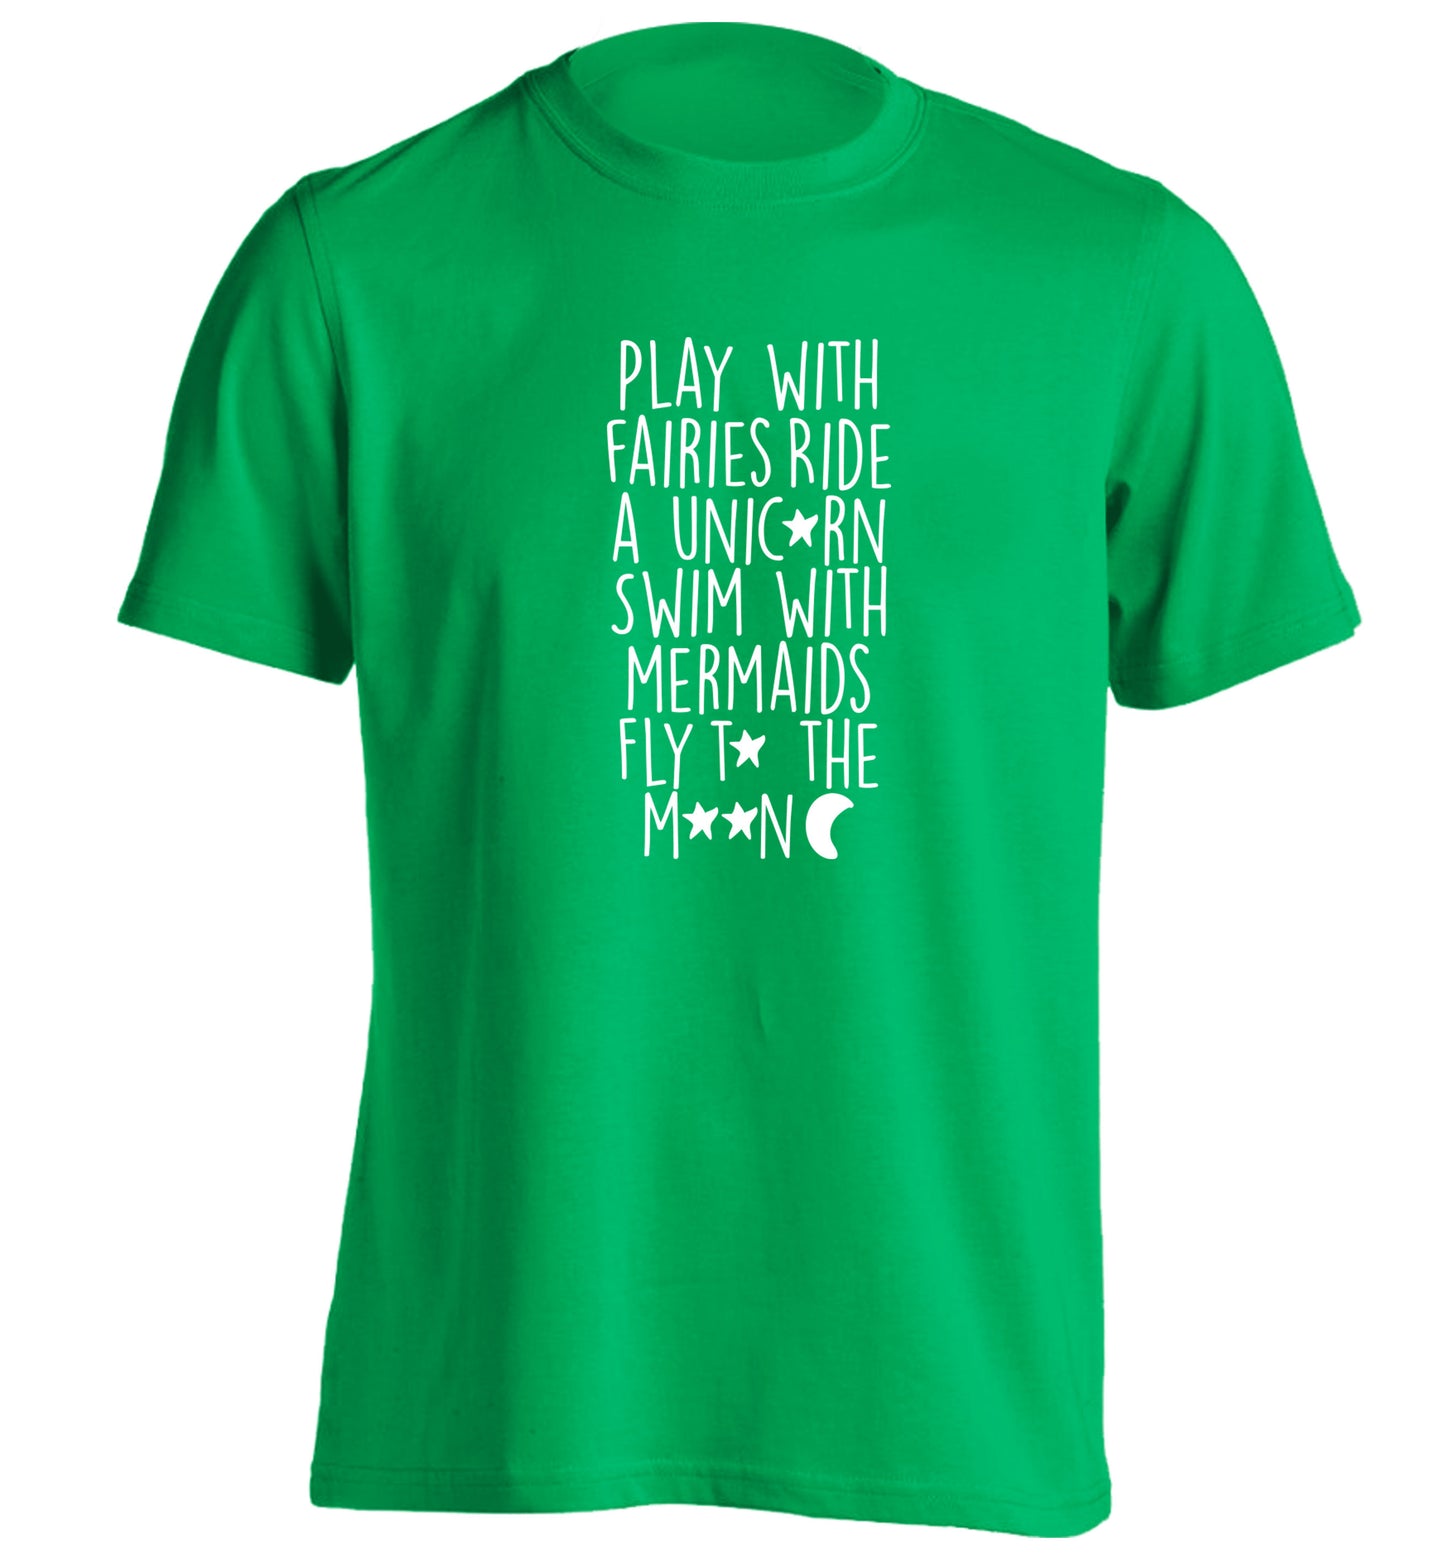 Play with fairies ride a unicorn swim with mermaids fly to the moon adults unisex green Tshirt 2XL